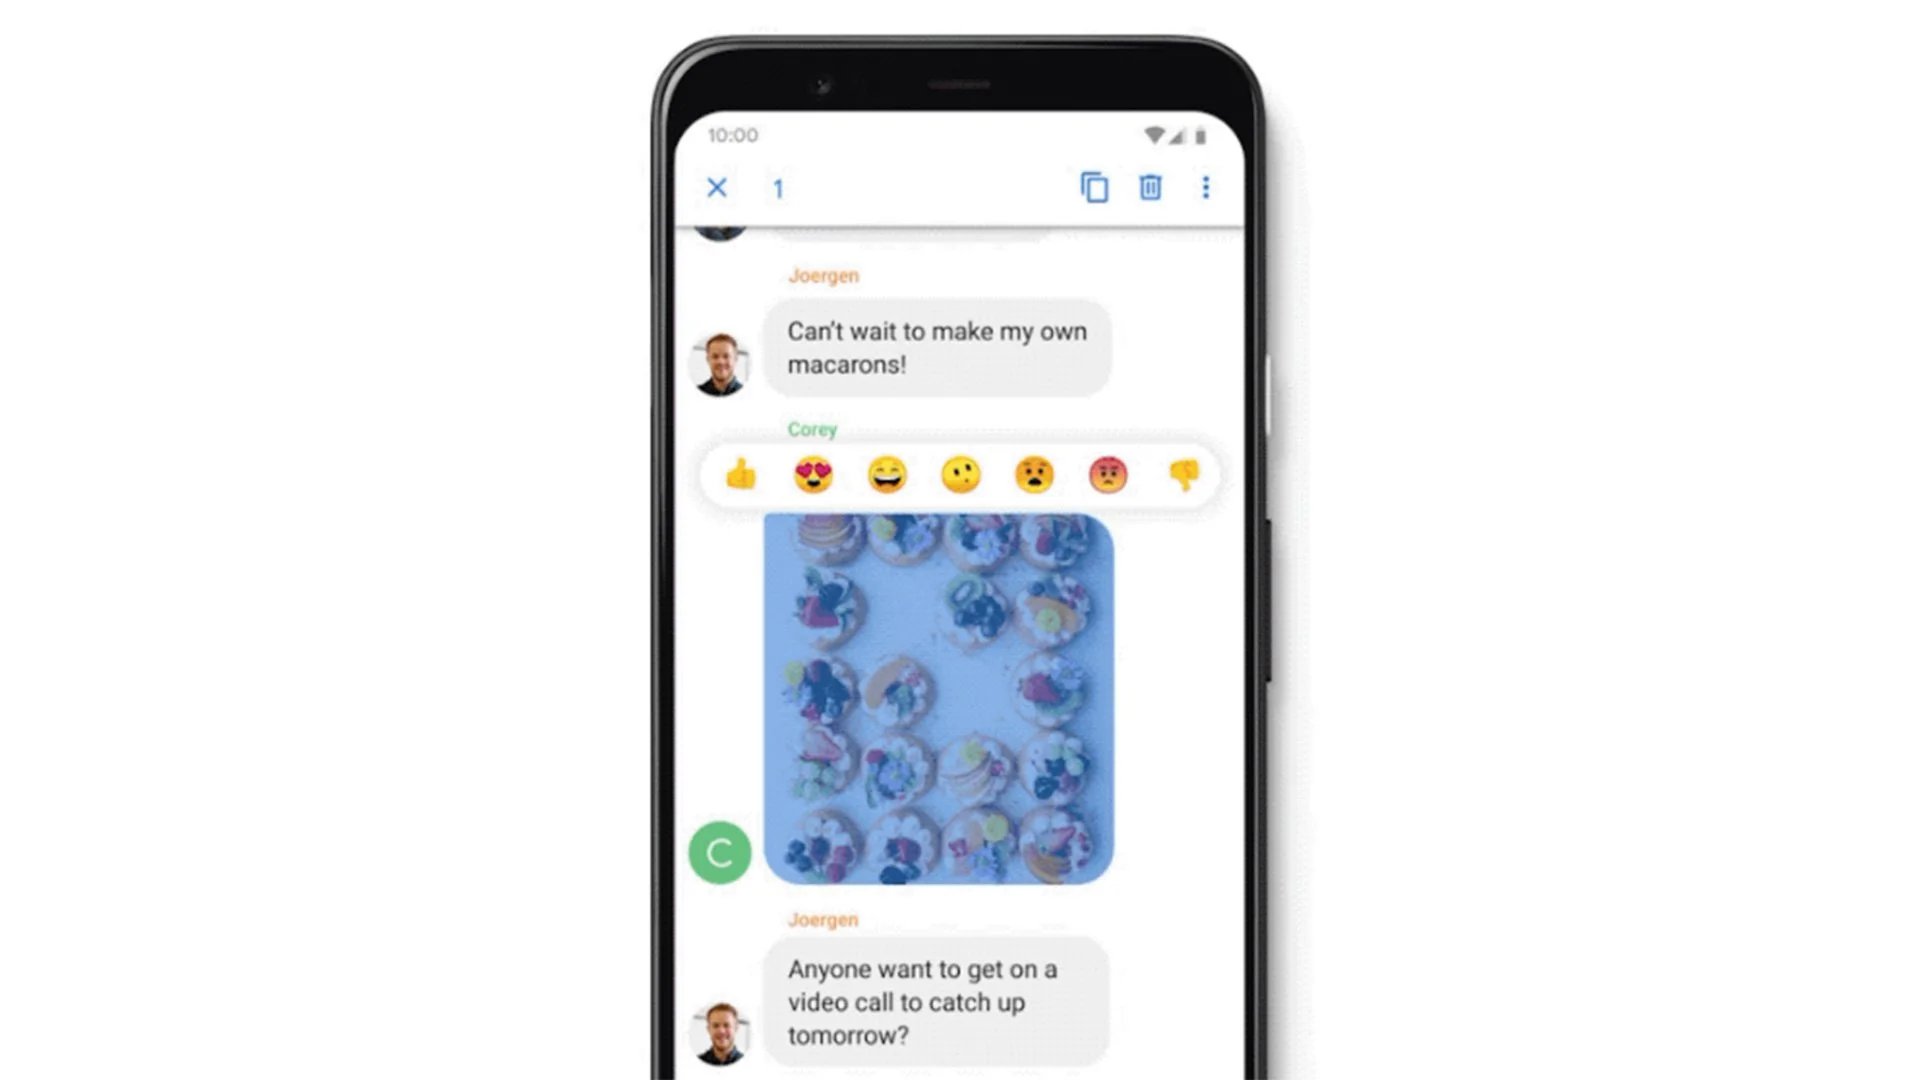 google-invites-apple-to-adopt-rcs-messaging-offers-to-help-bring-it-on-iphones